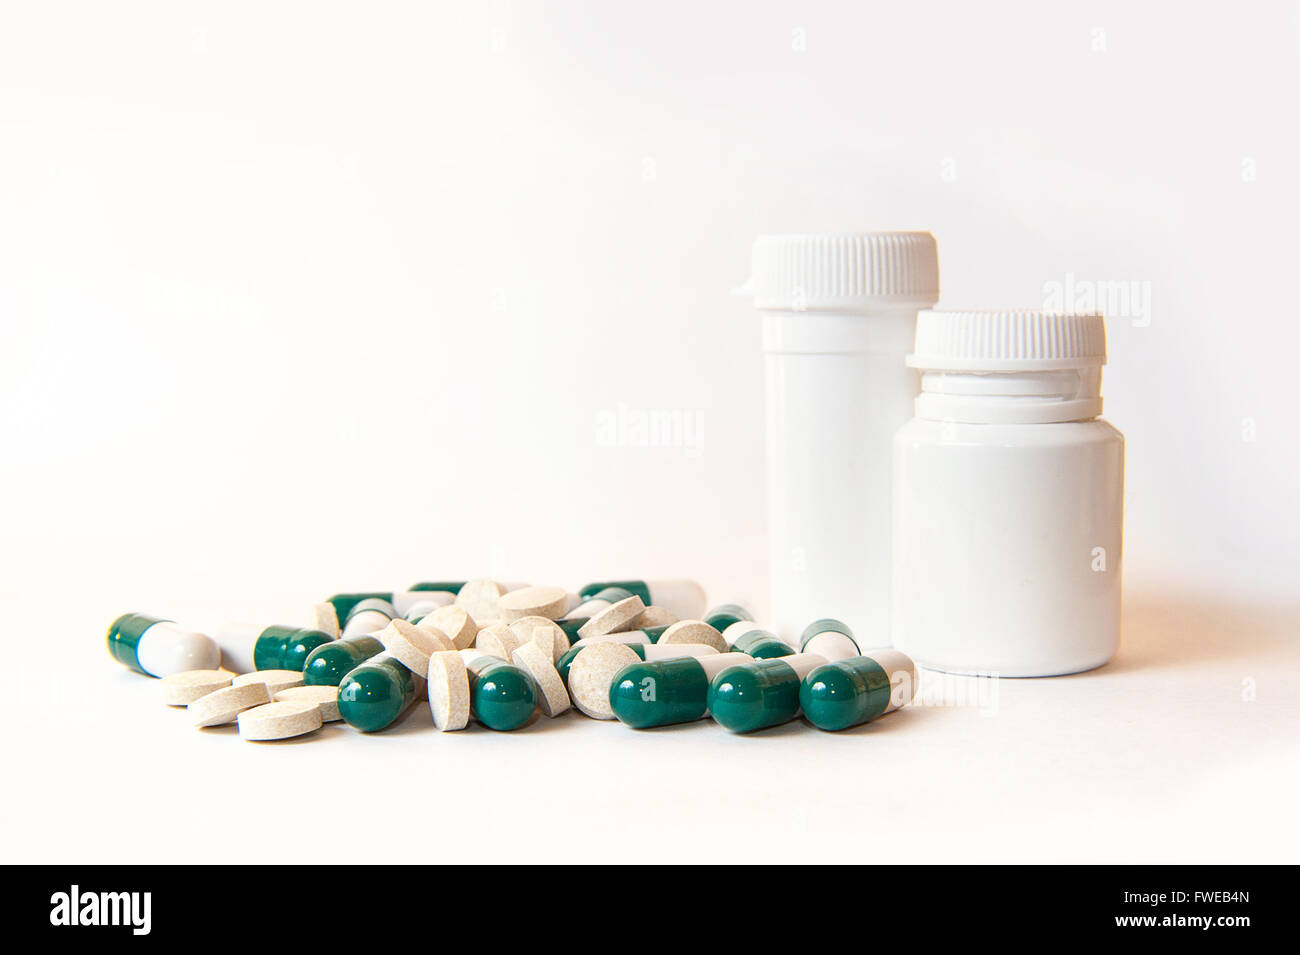 Two white medicine bottle with contents spilled in front Stock Photo